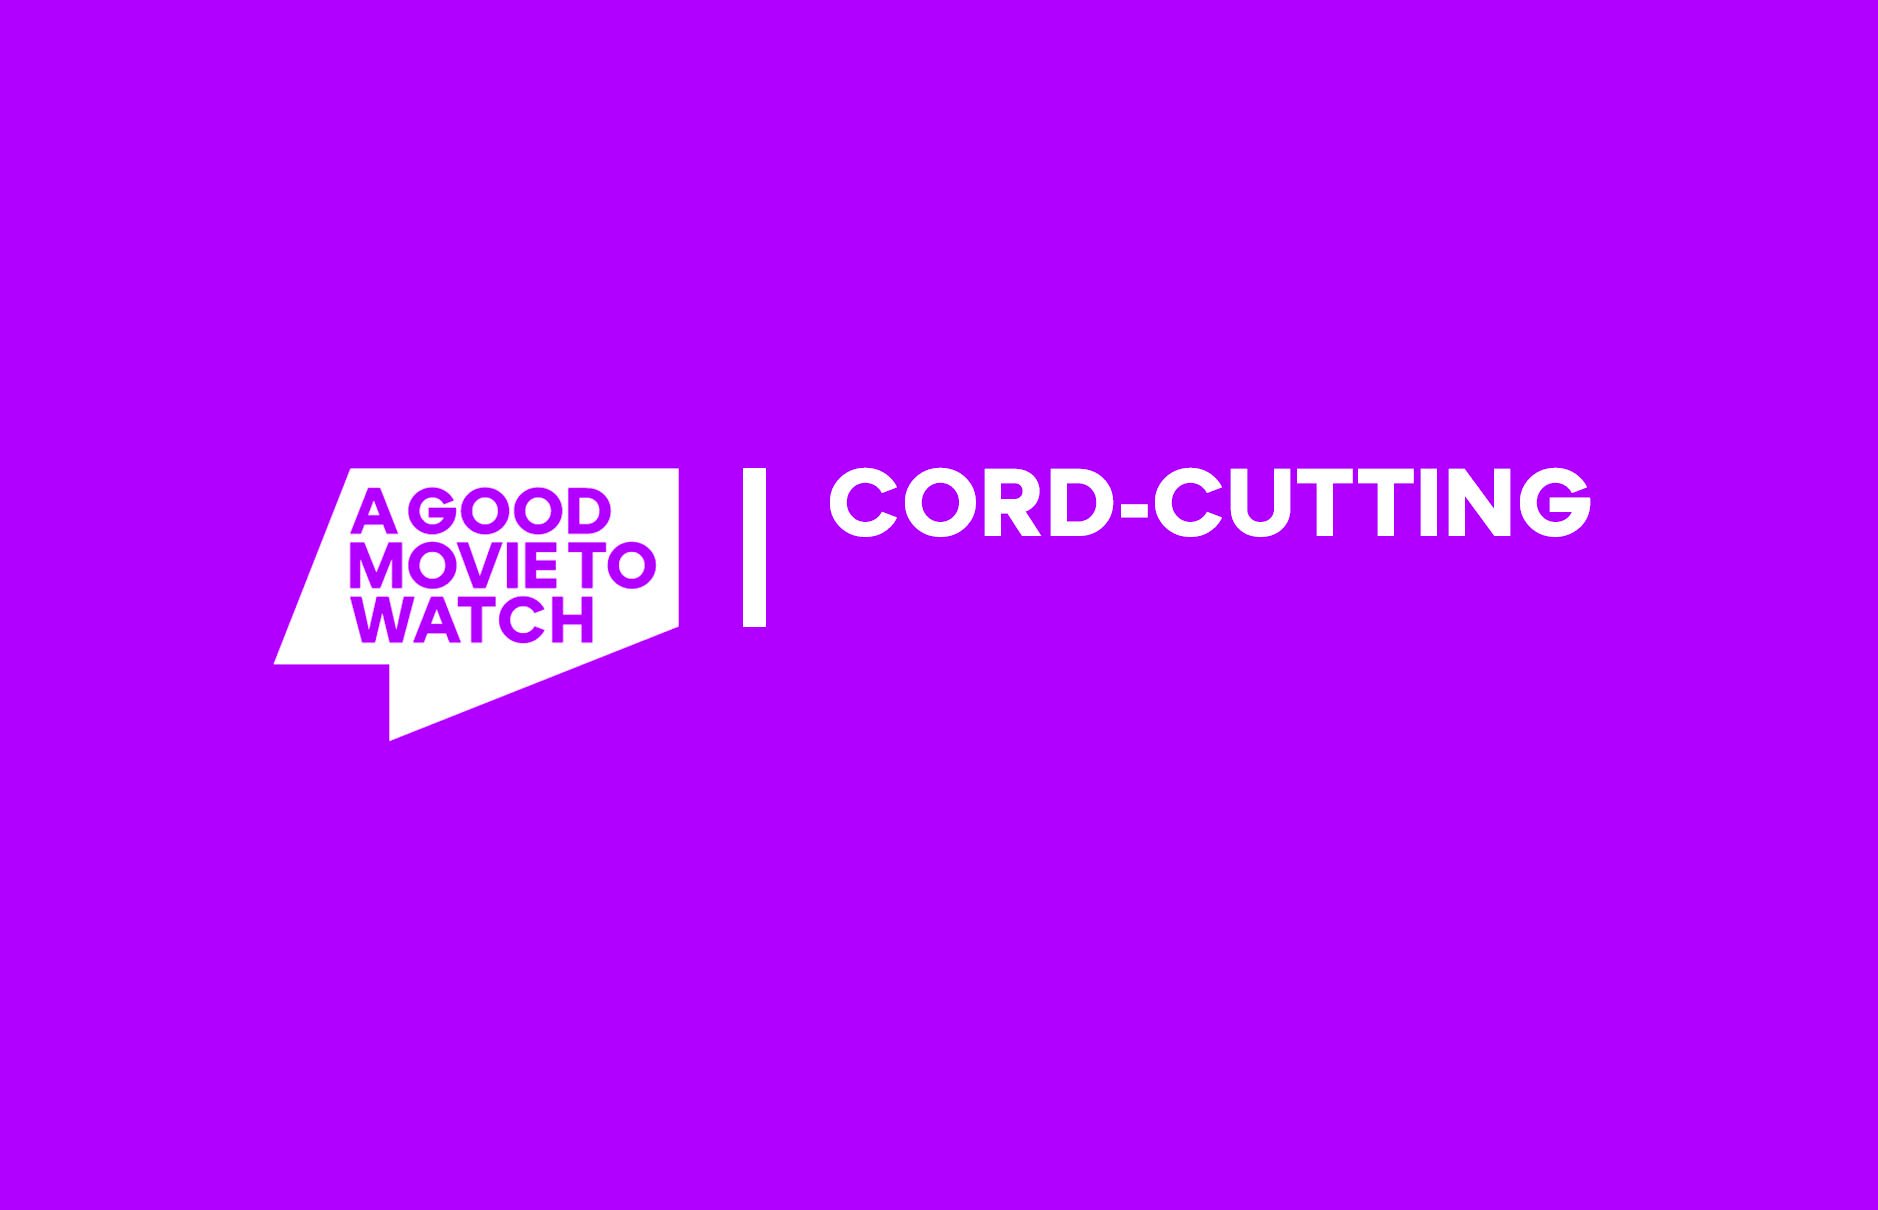 cord-cutting featured image